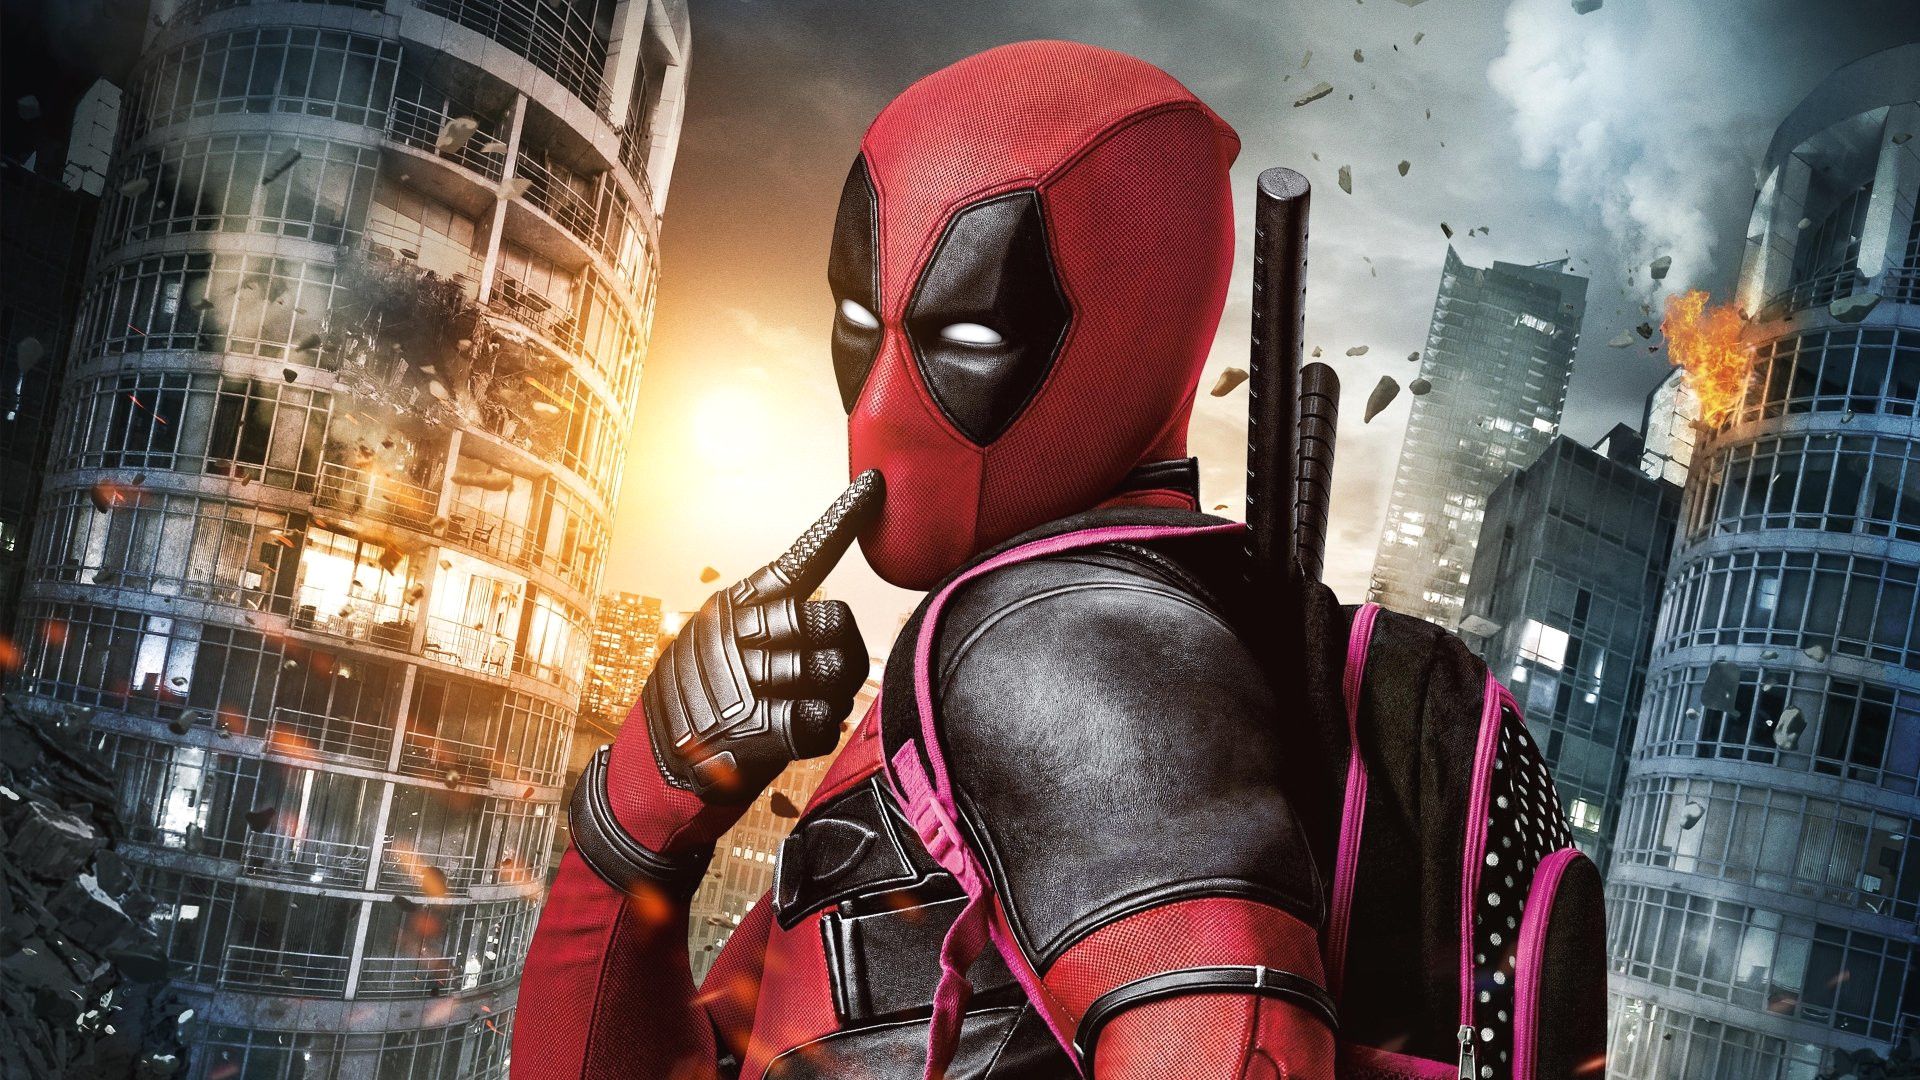 wallpapers full hd 4k para pc,action adventure game,superhero,fictional character,deadpool,pc game